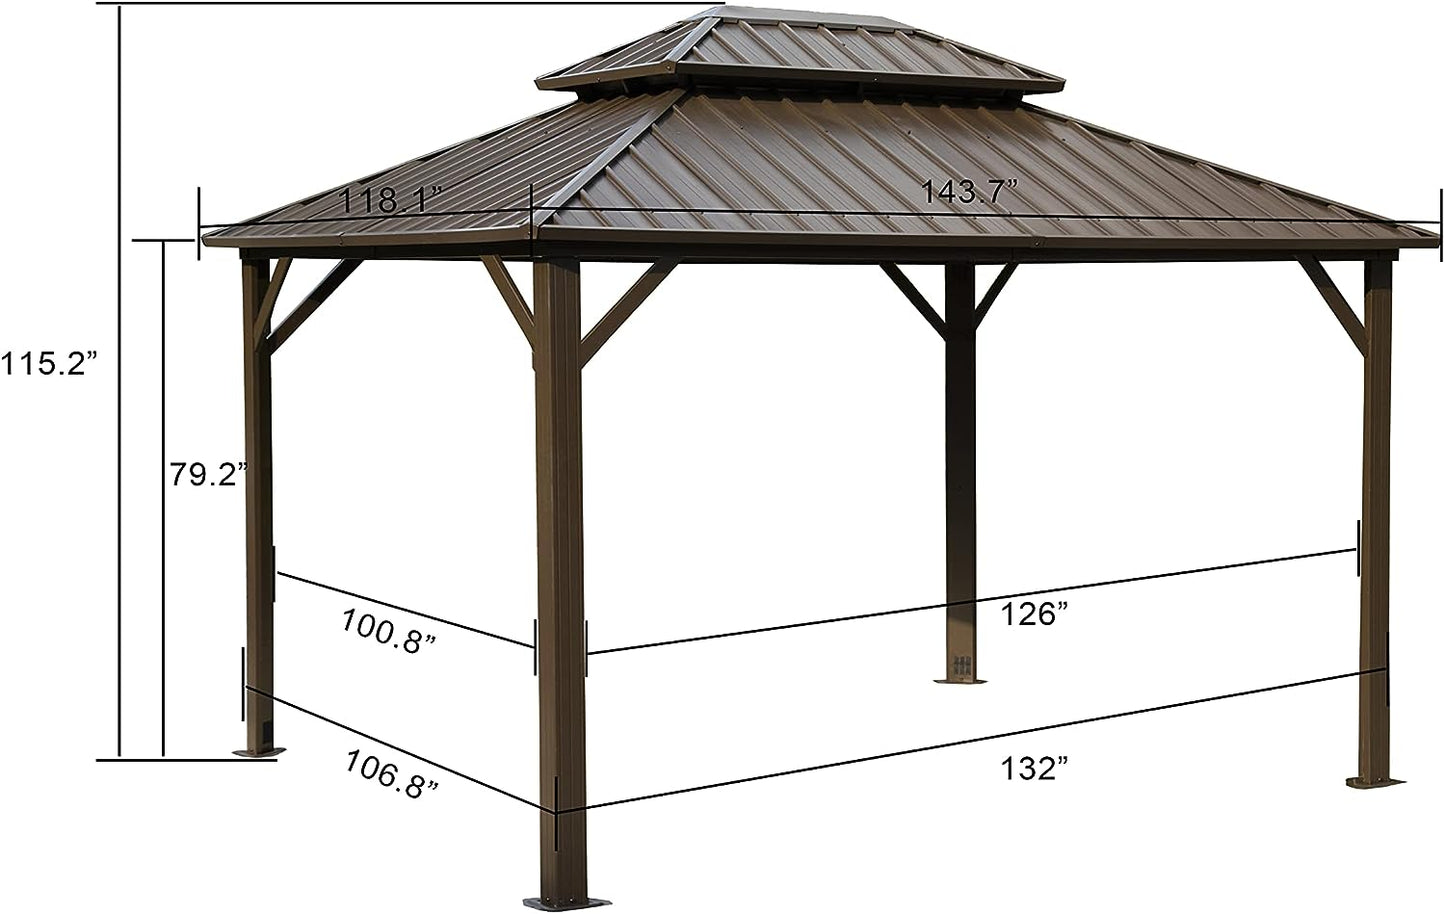 LUCKYBERRY 10 X 12 FT Galvanized Steel Hard Top Gazebo Canopy with Netting, Brown